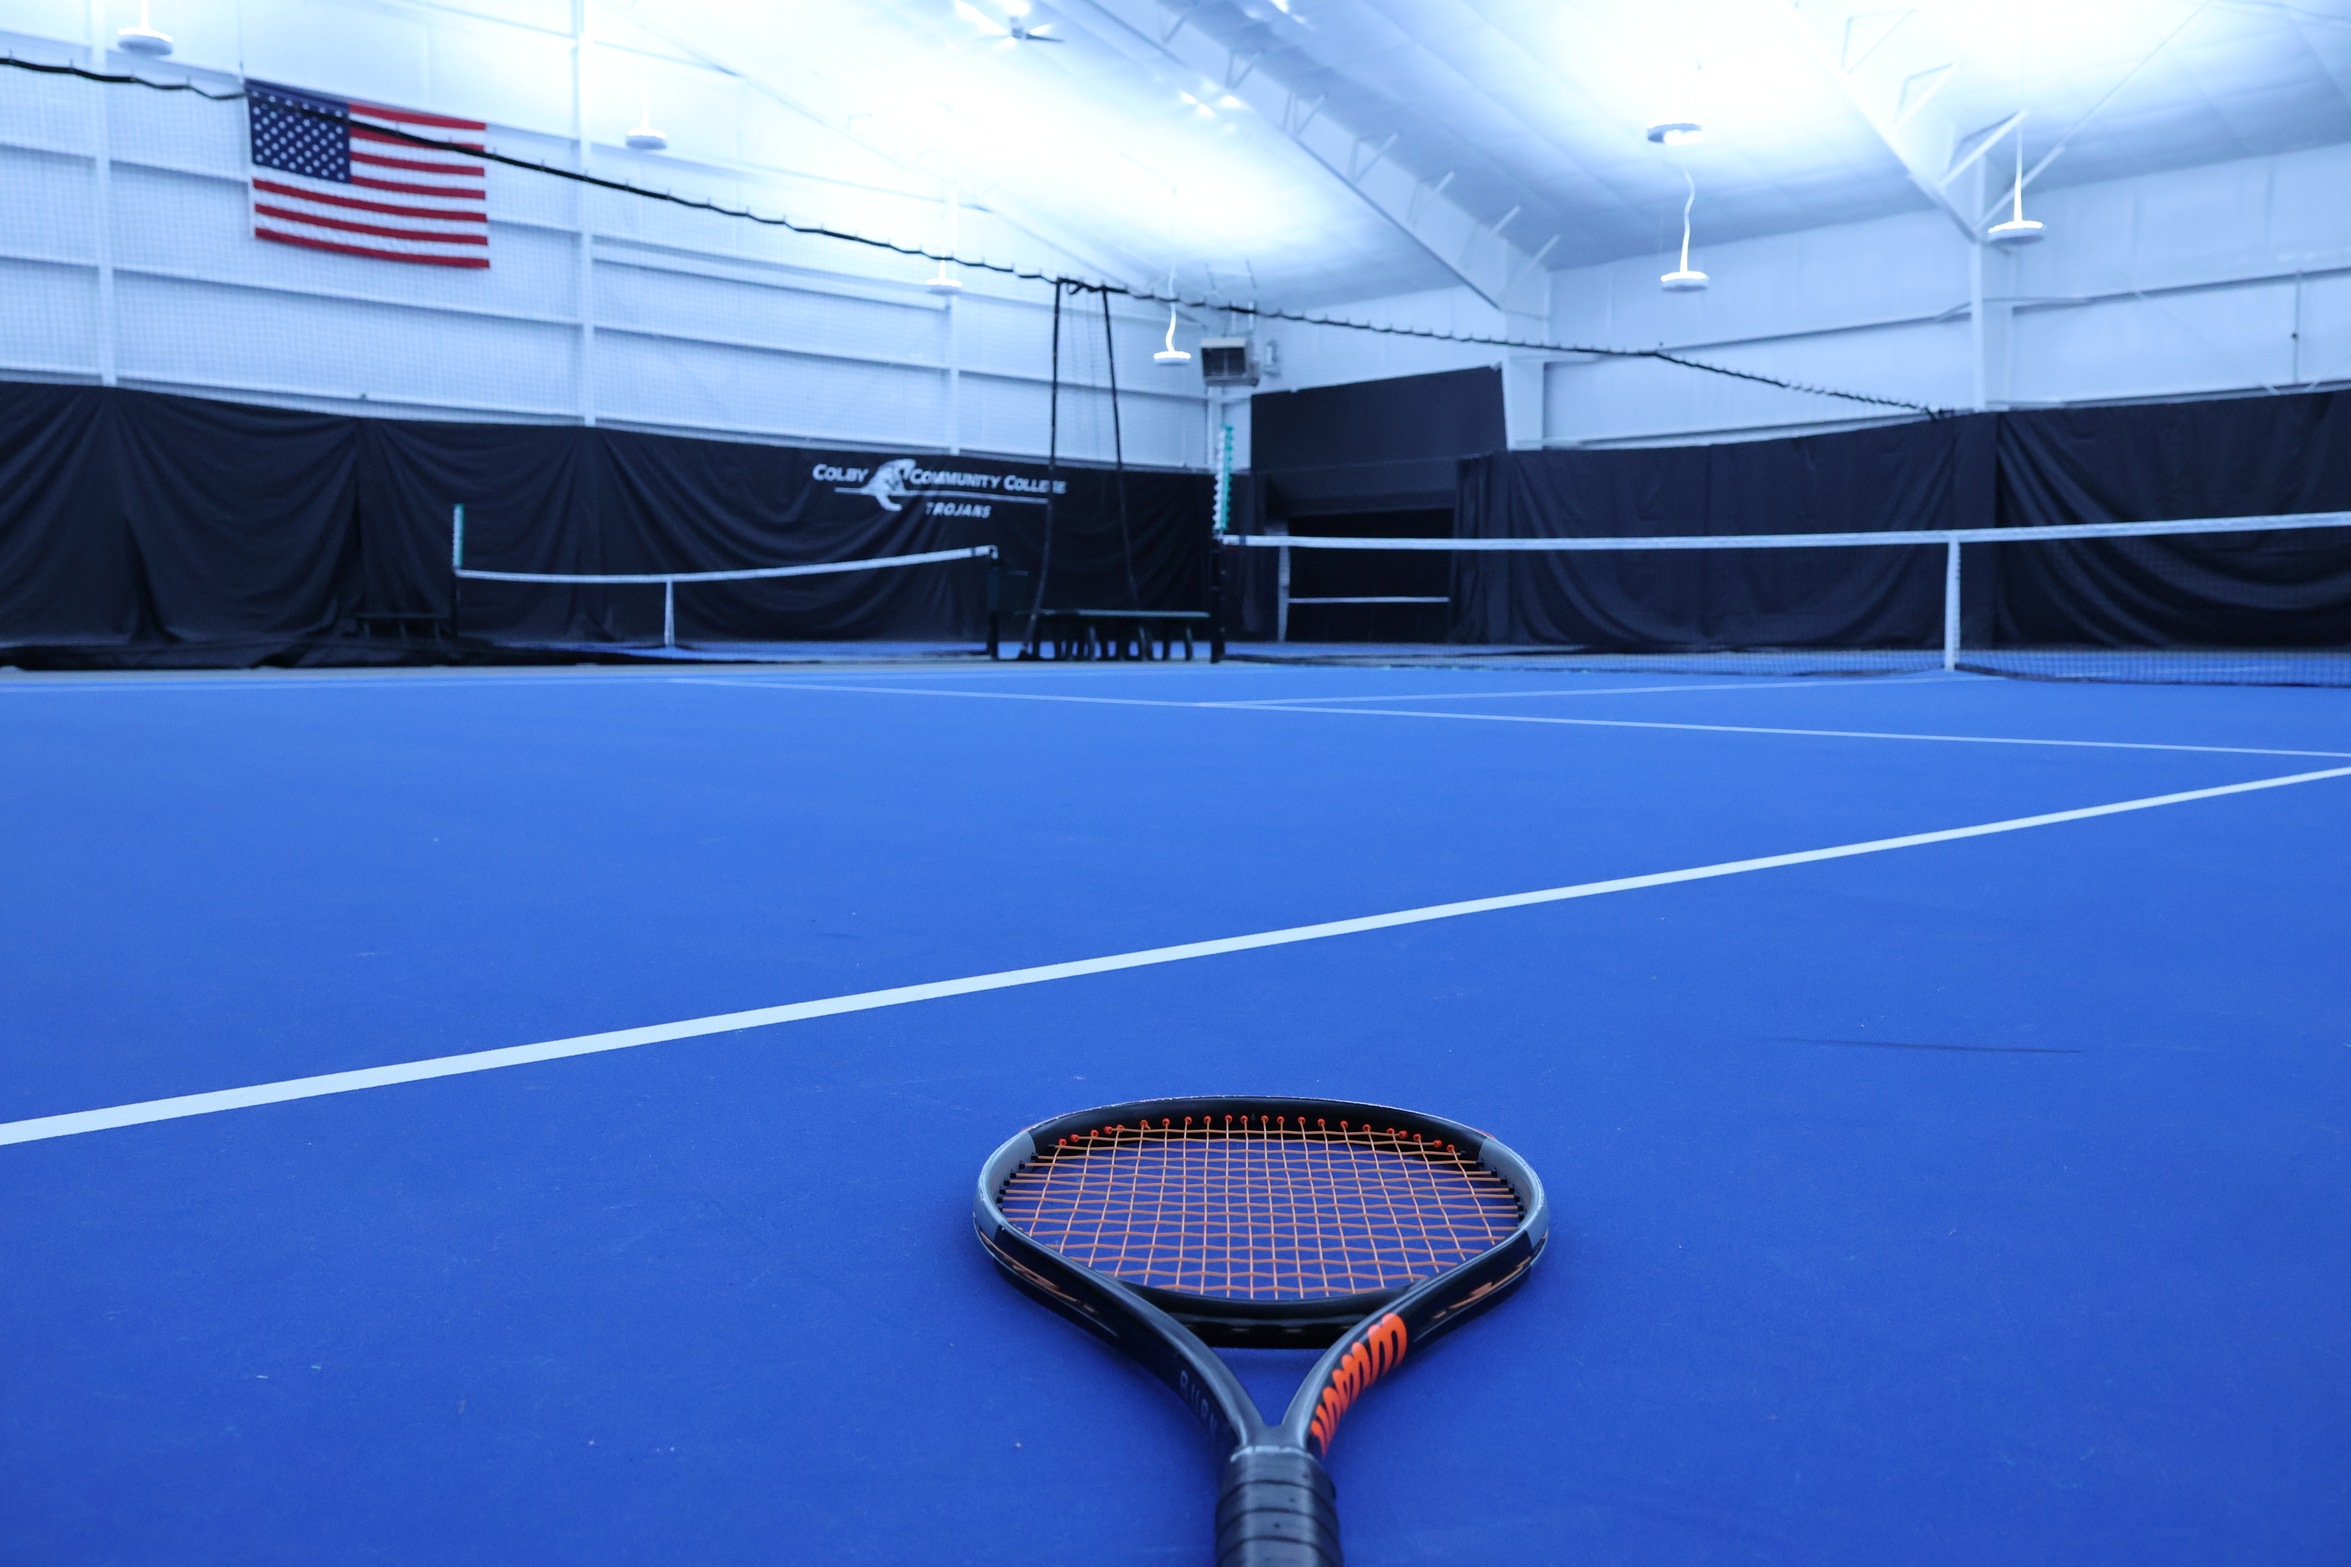 Colby Tennis Center